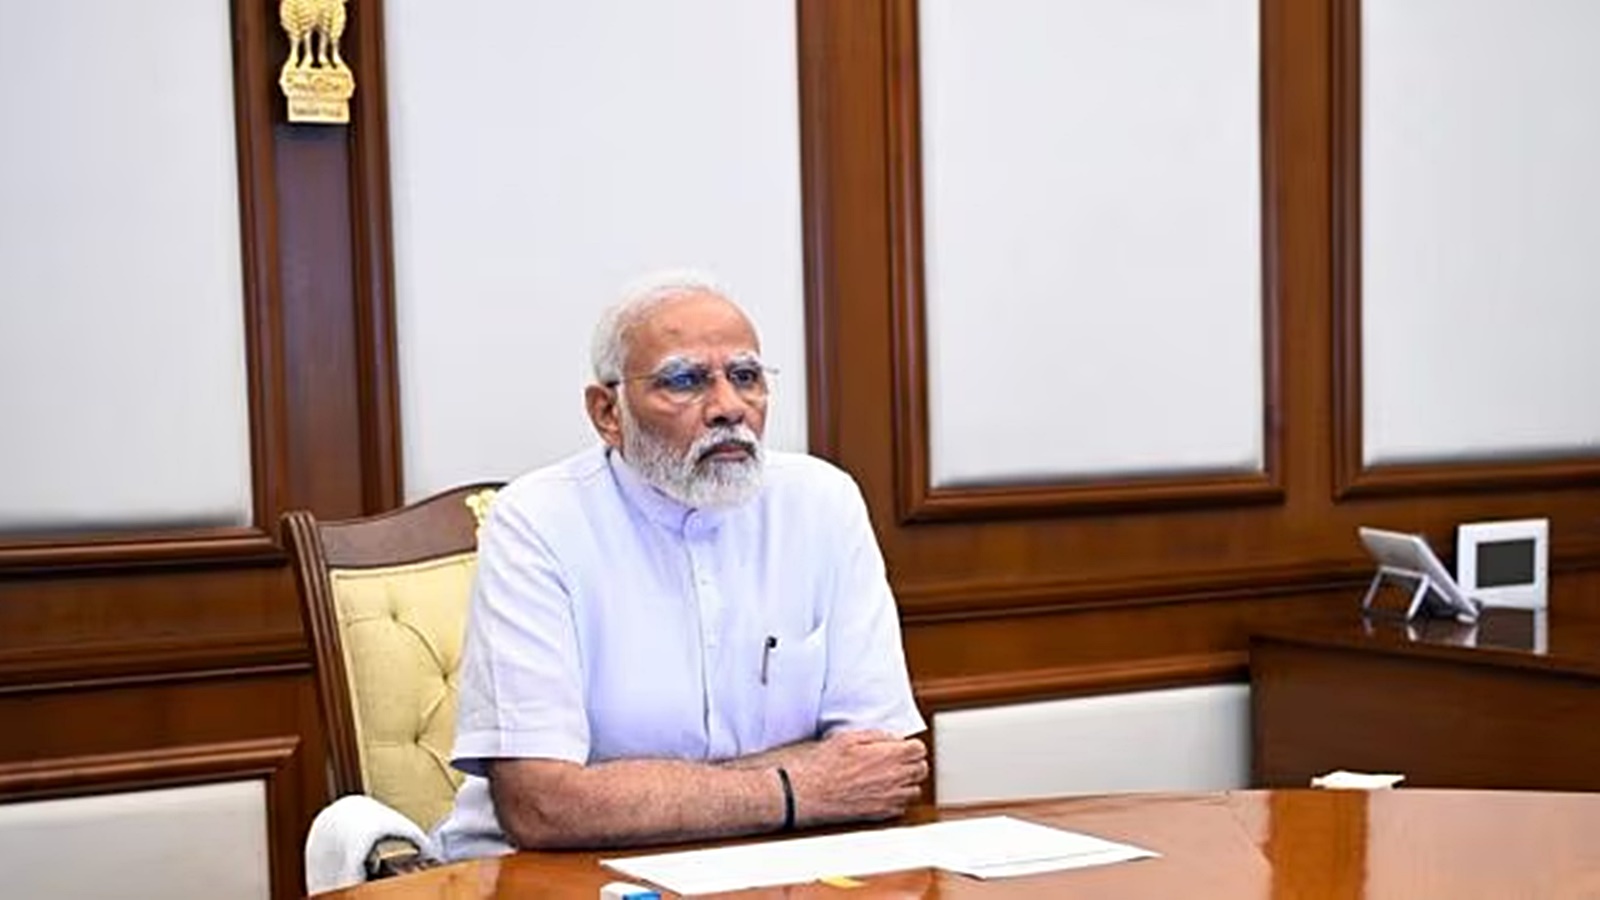 Amid J&K militant attacks, PM Modi chairs review meeting, directs deployment of comprehensive counter-terrorism capabilities |  News from India